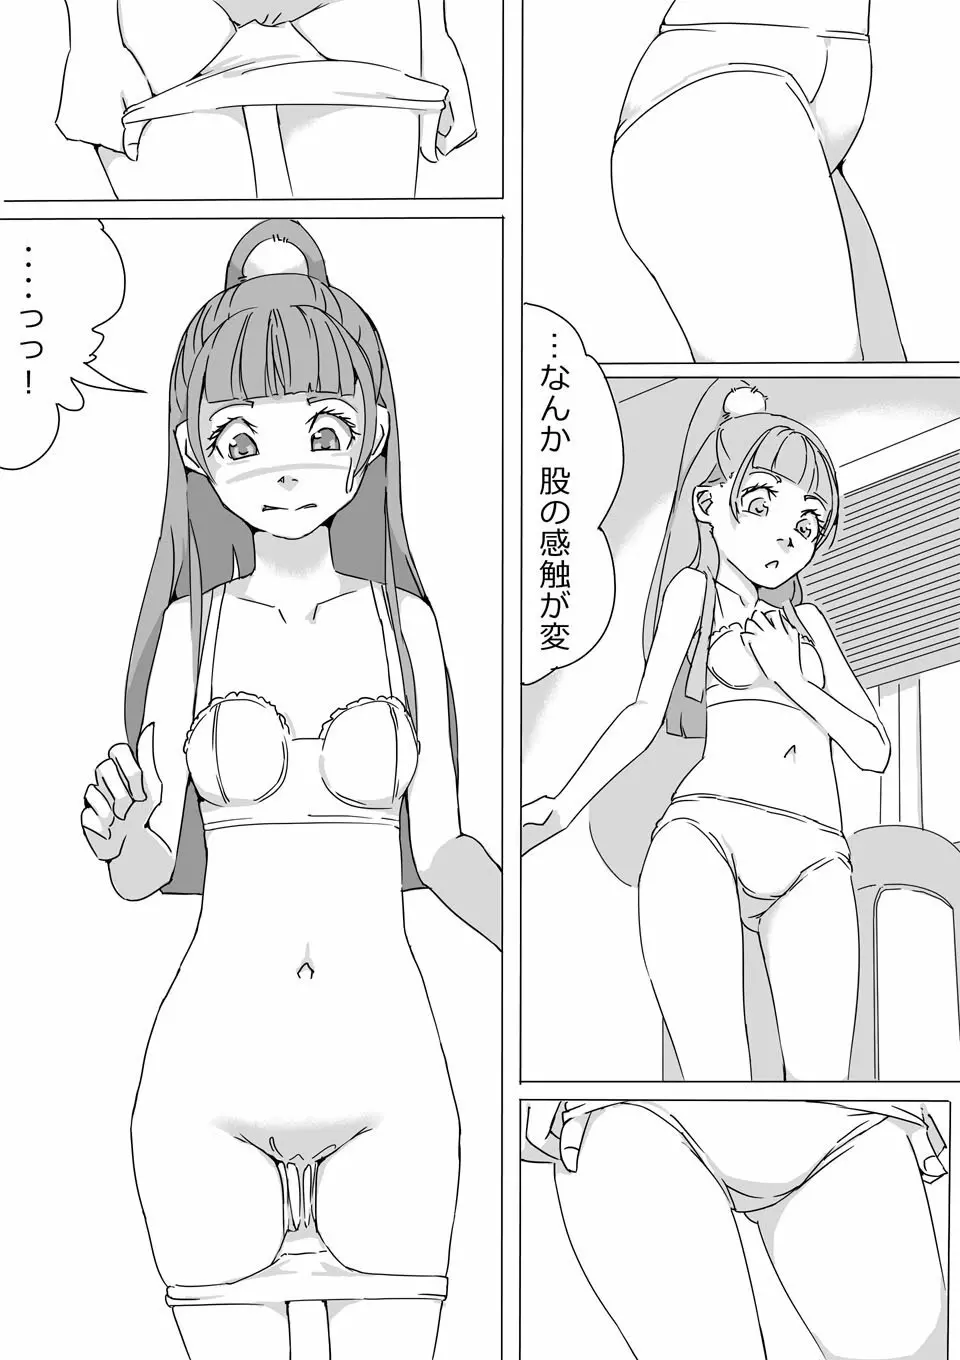 Untitled Precure Doujinshi - page16